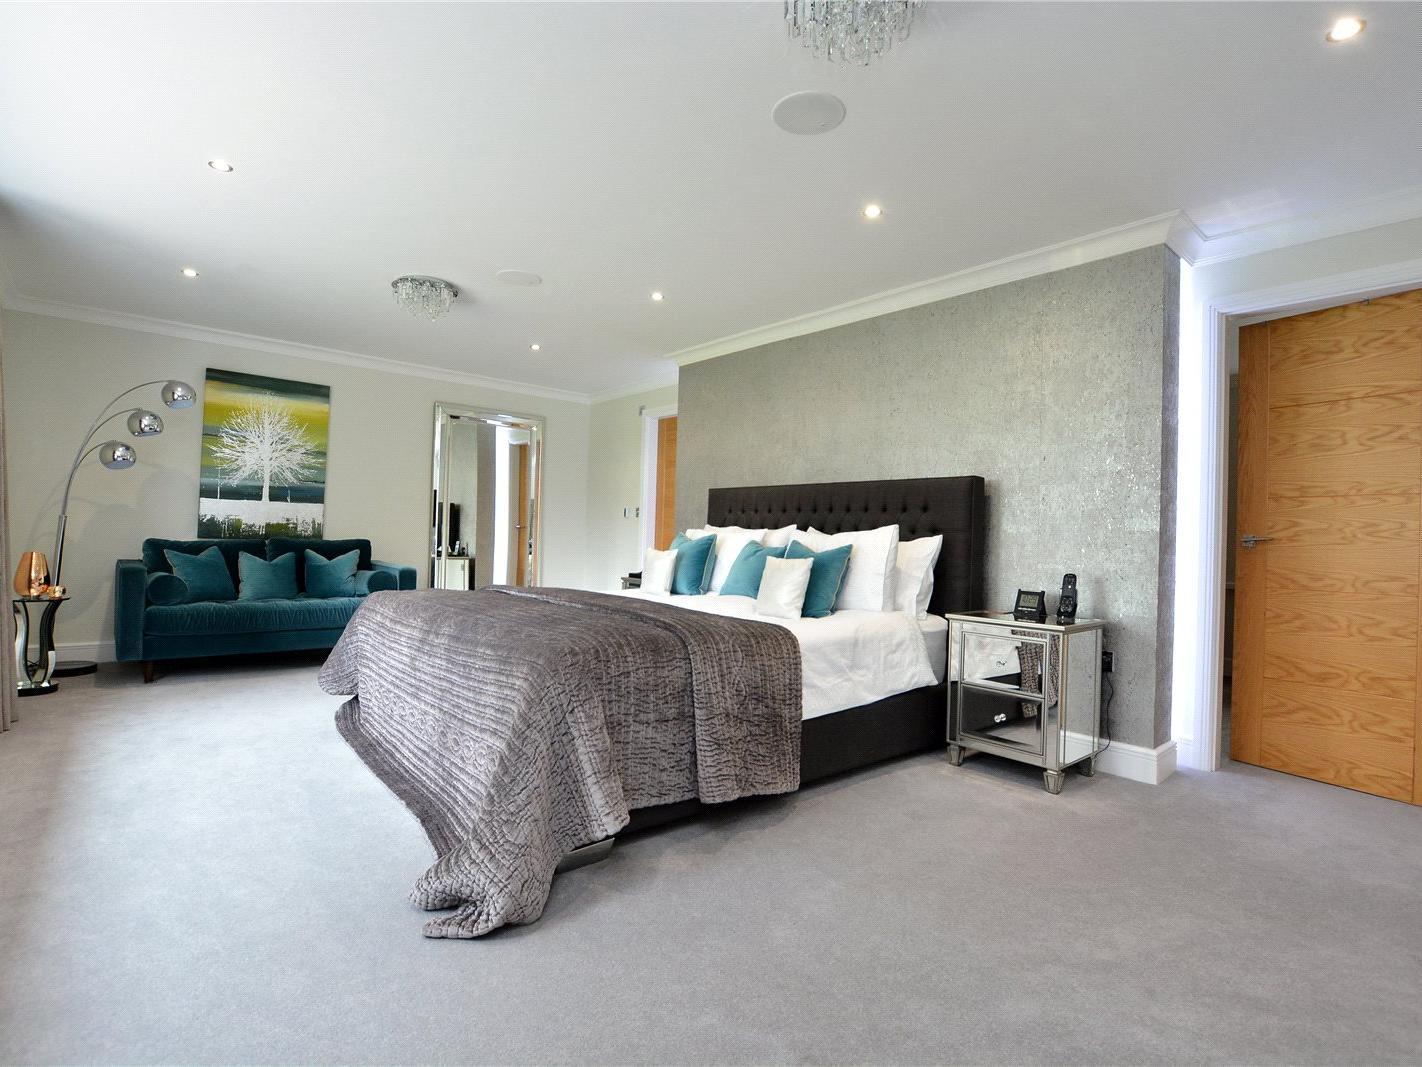 The master bedroom suite has views out over the rear garden and the countryside beyond.